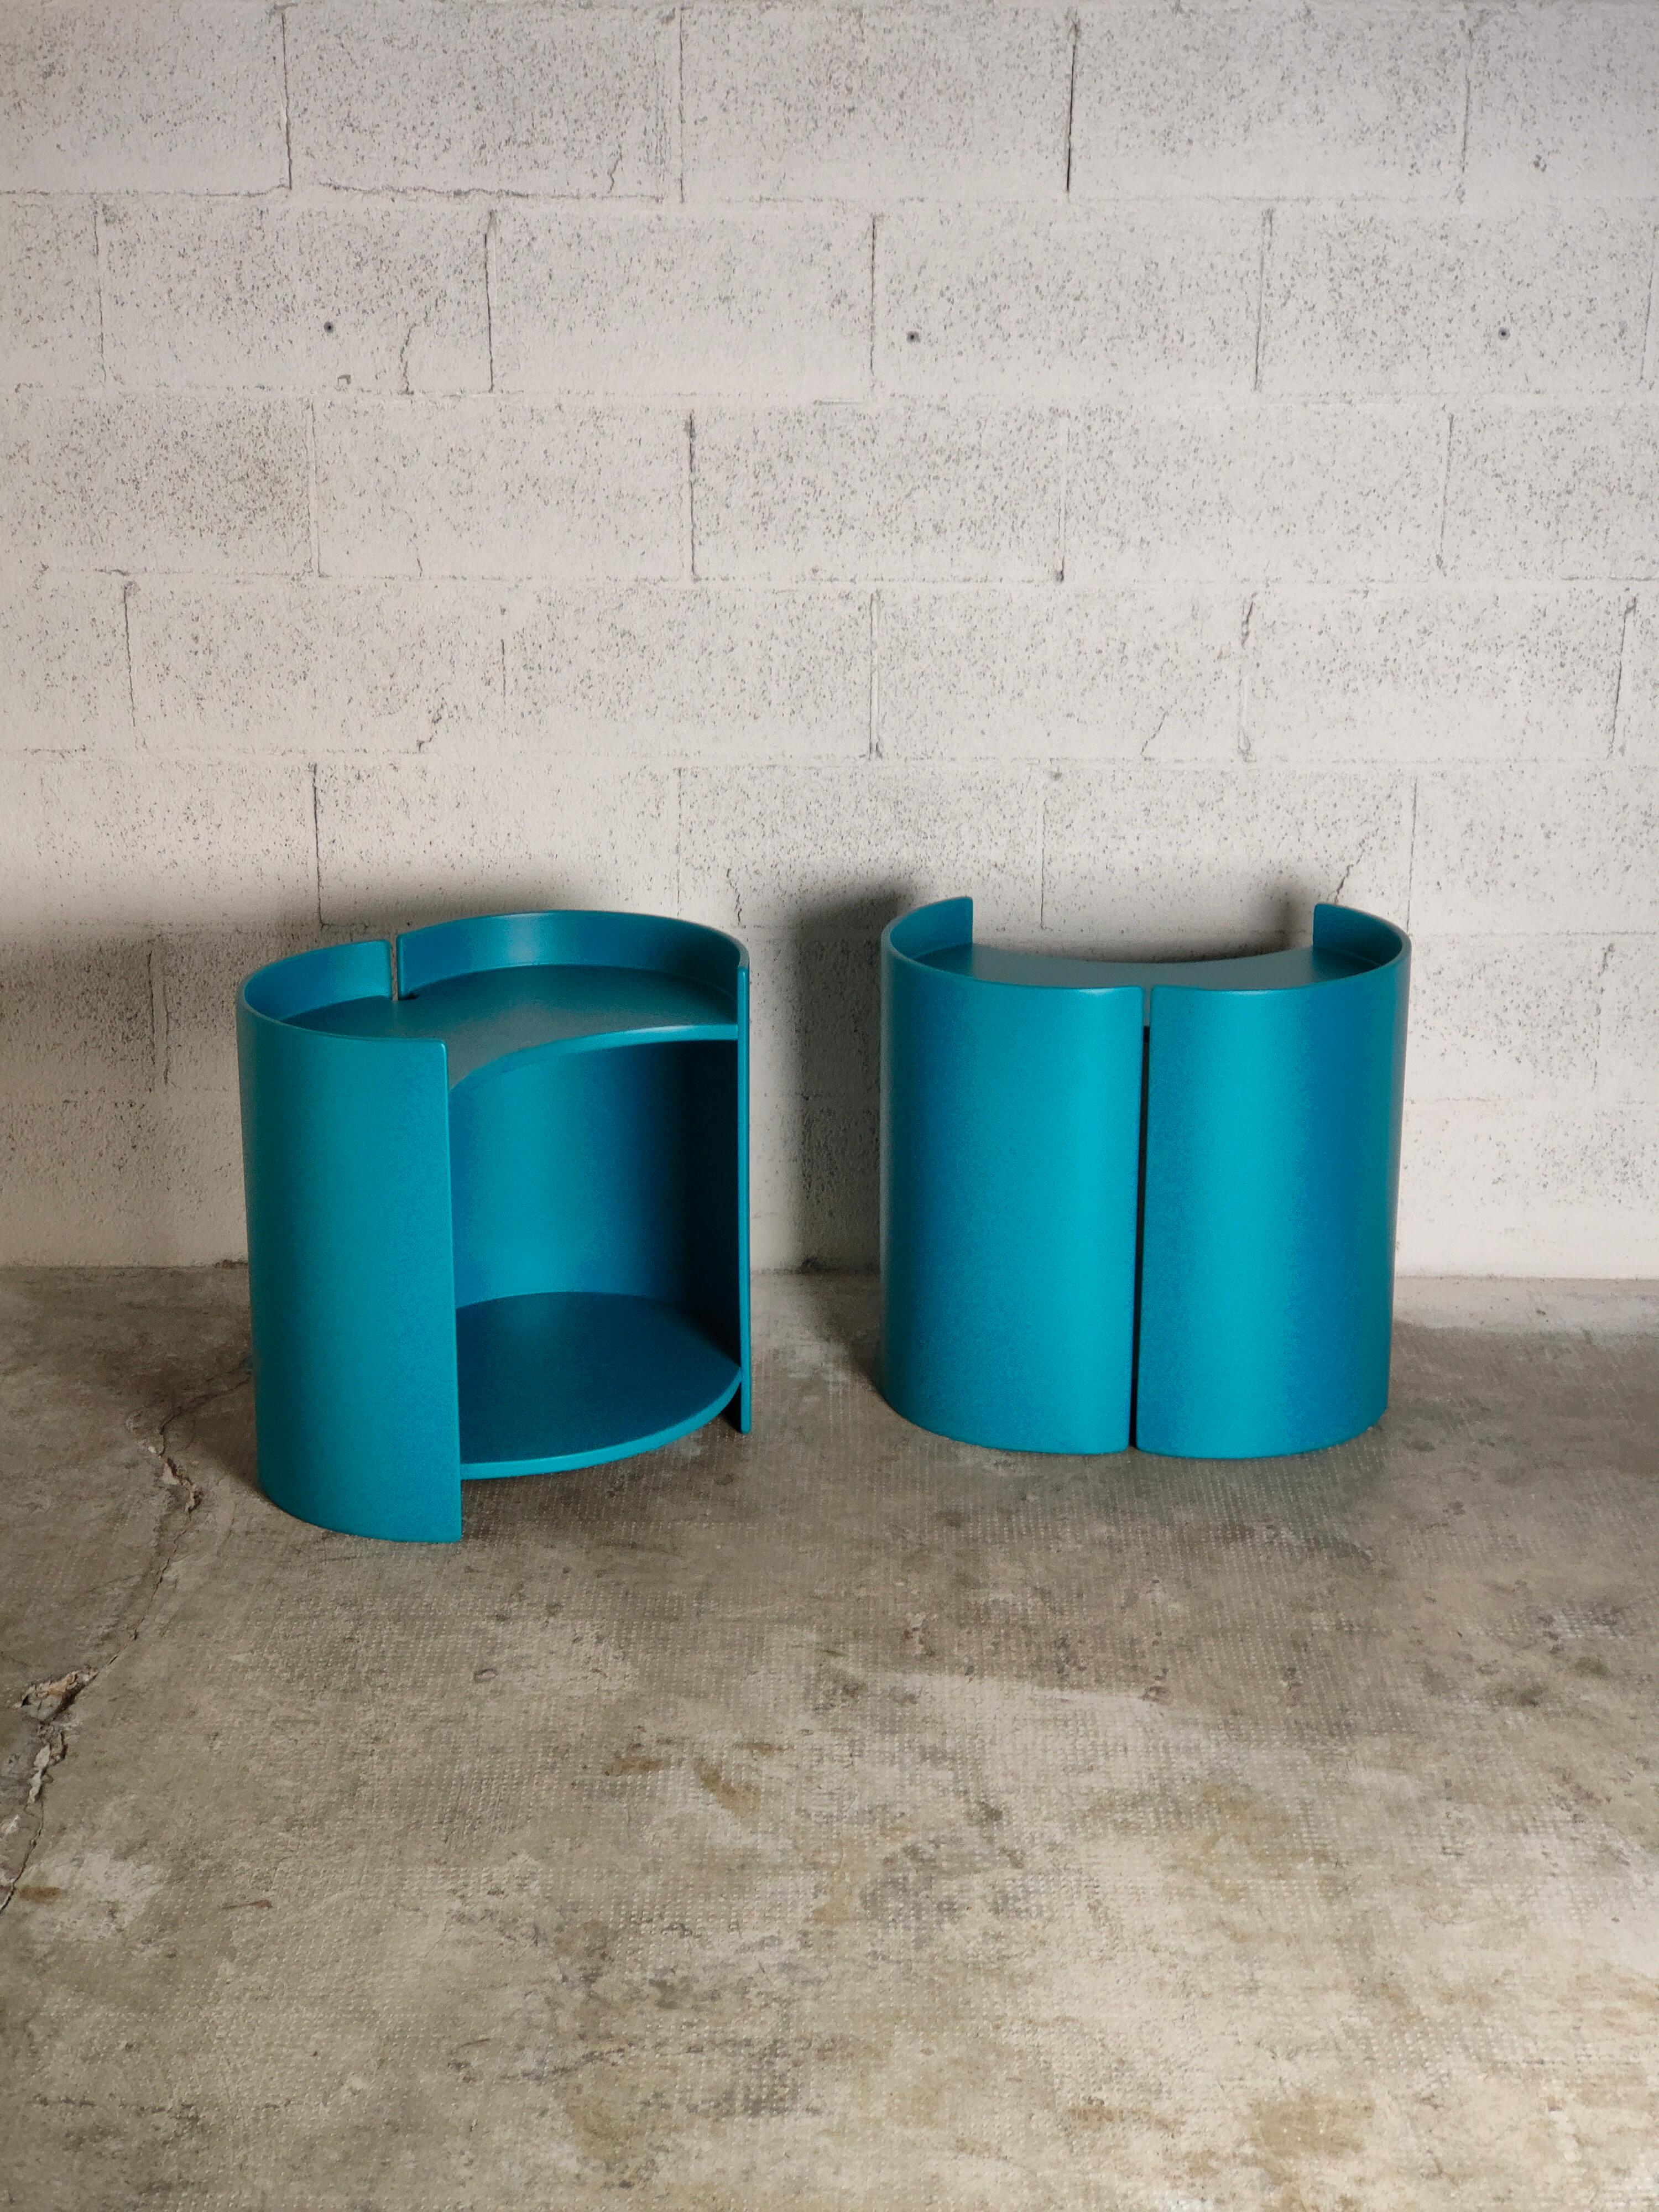 Pair of side table or nightstands, Gea model, designed by Kazuhide Takahama for Gavina 1960s. Sculptural bentwood form. 
Condition is very good also because they have been relaquered recently.
Dimension: L 53 cm - D 42 cm - H 53 cm
While his